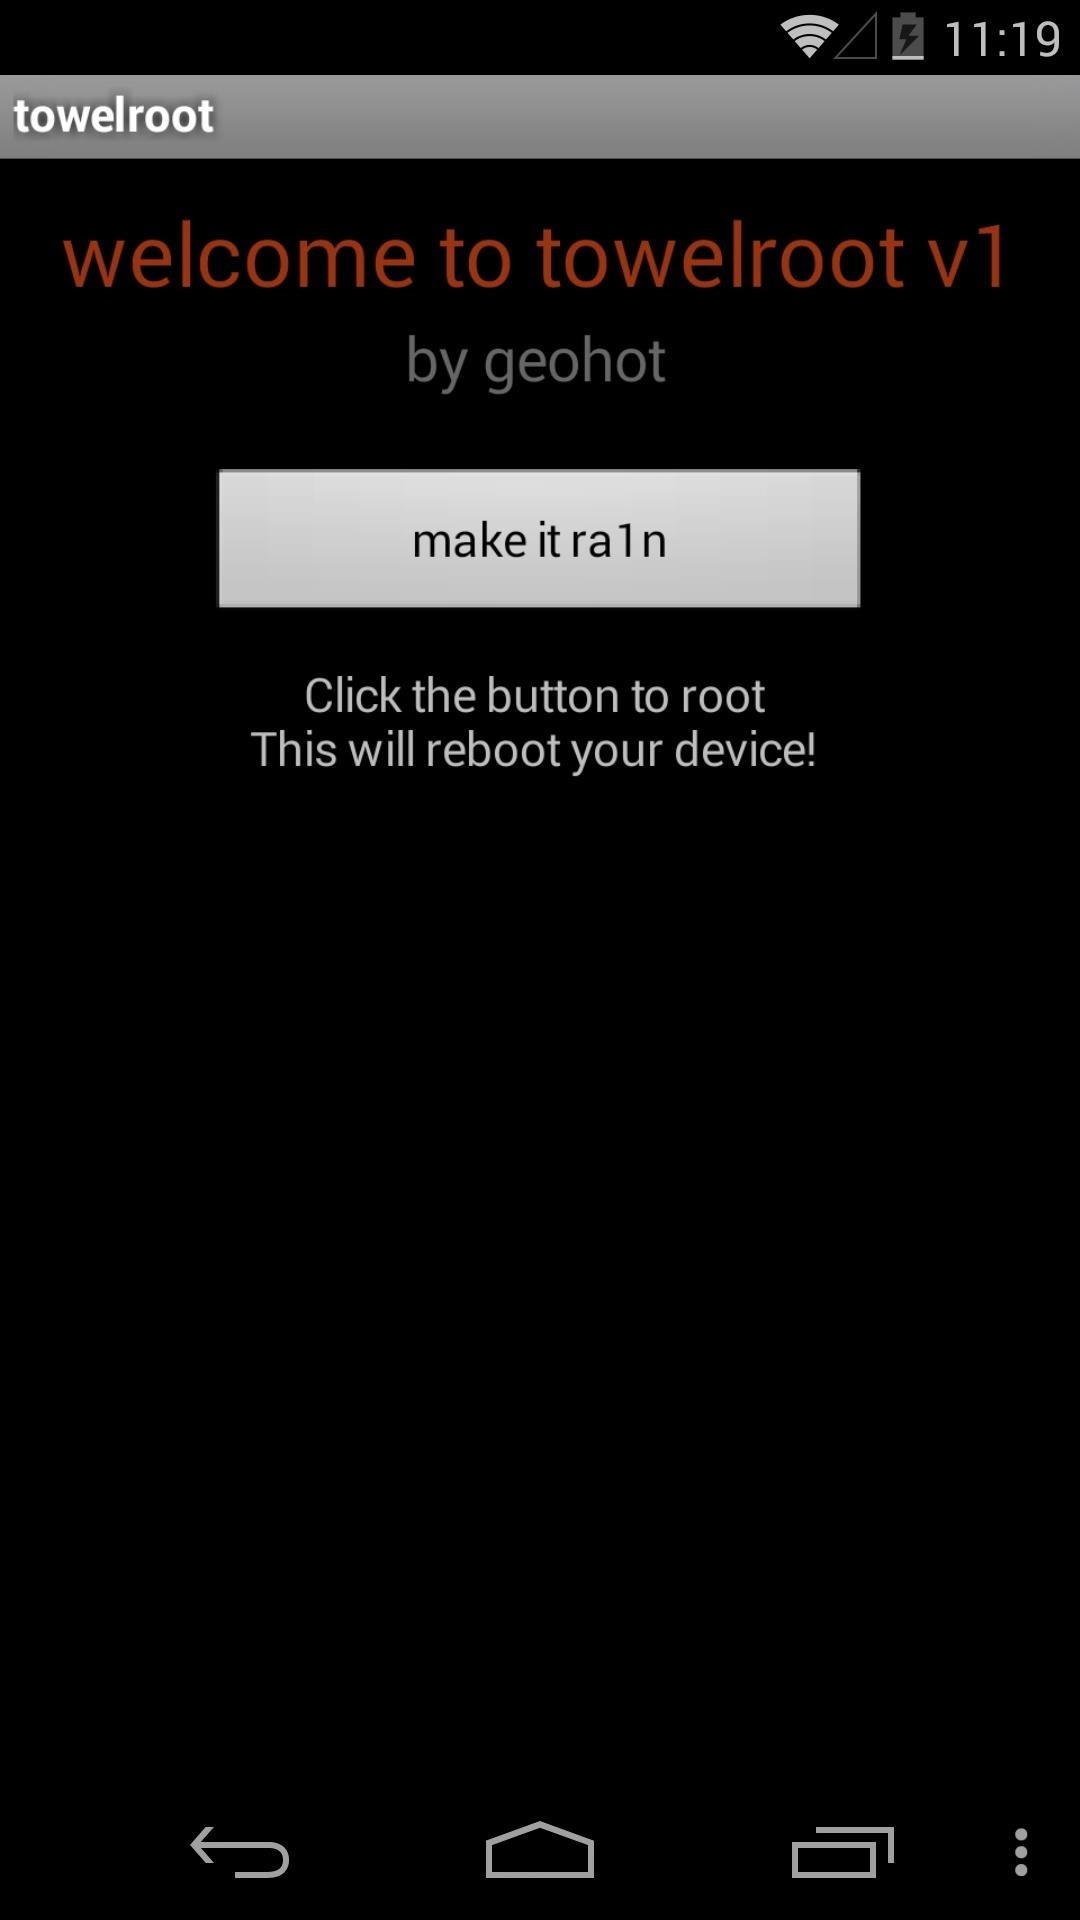 How to Root a Nexus 4 or Nexus 5 in Under a Minute